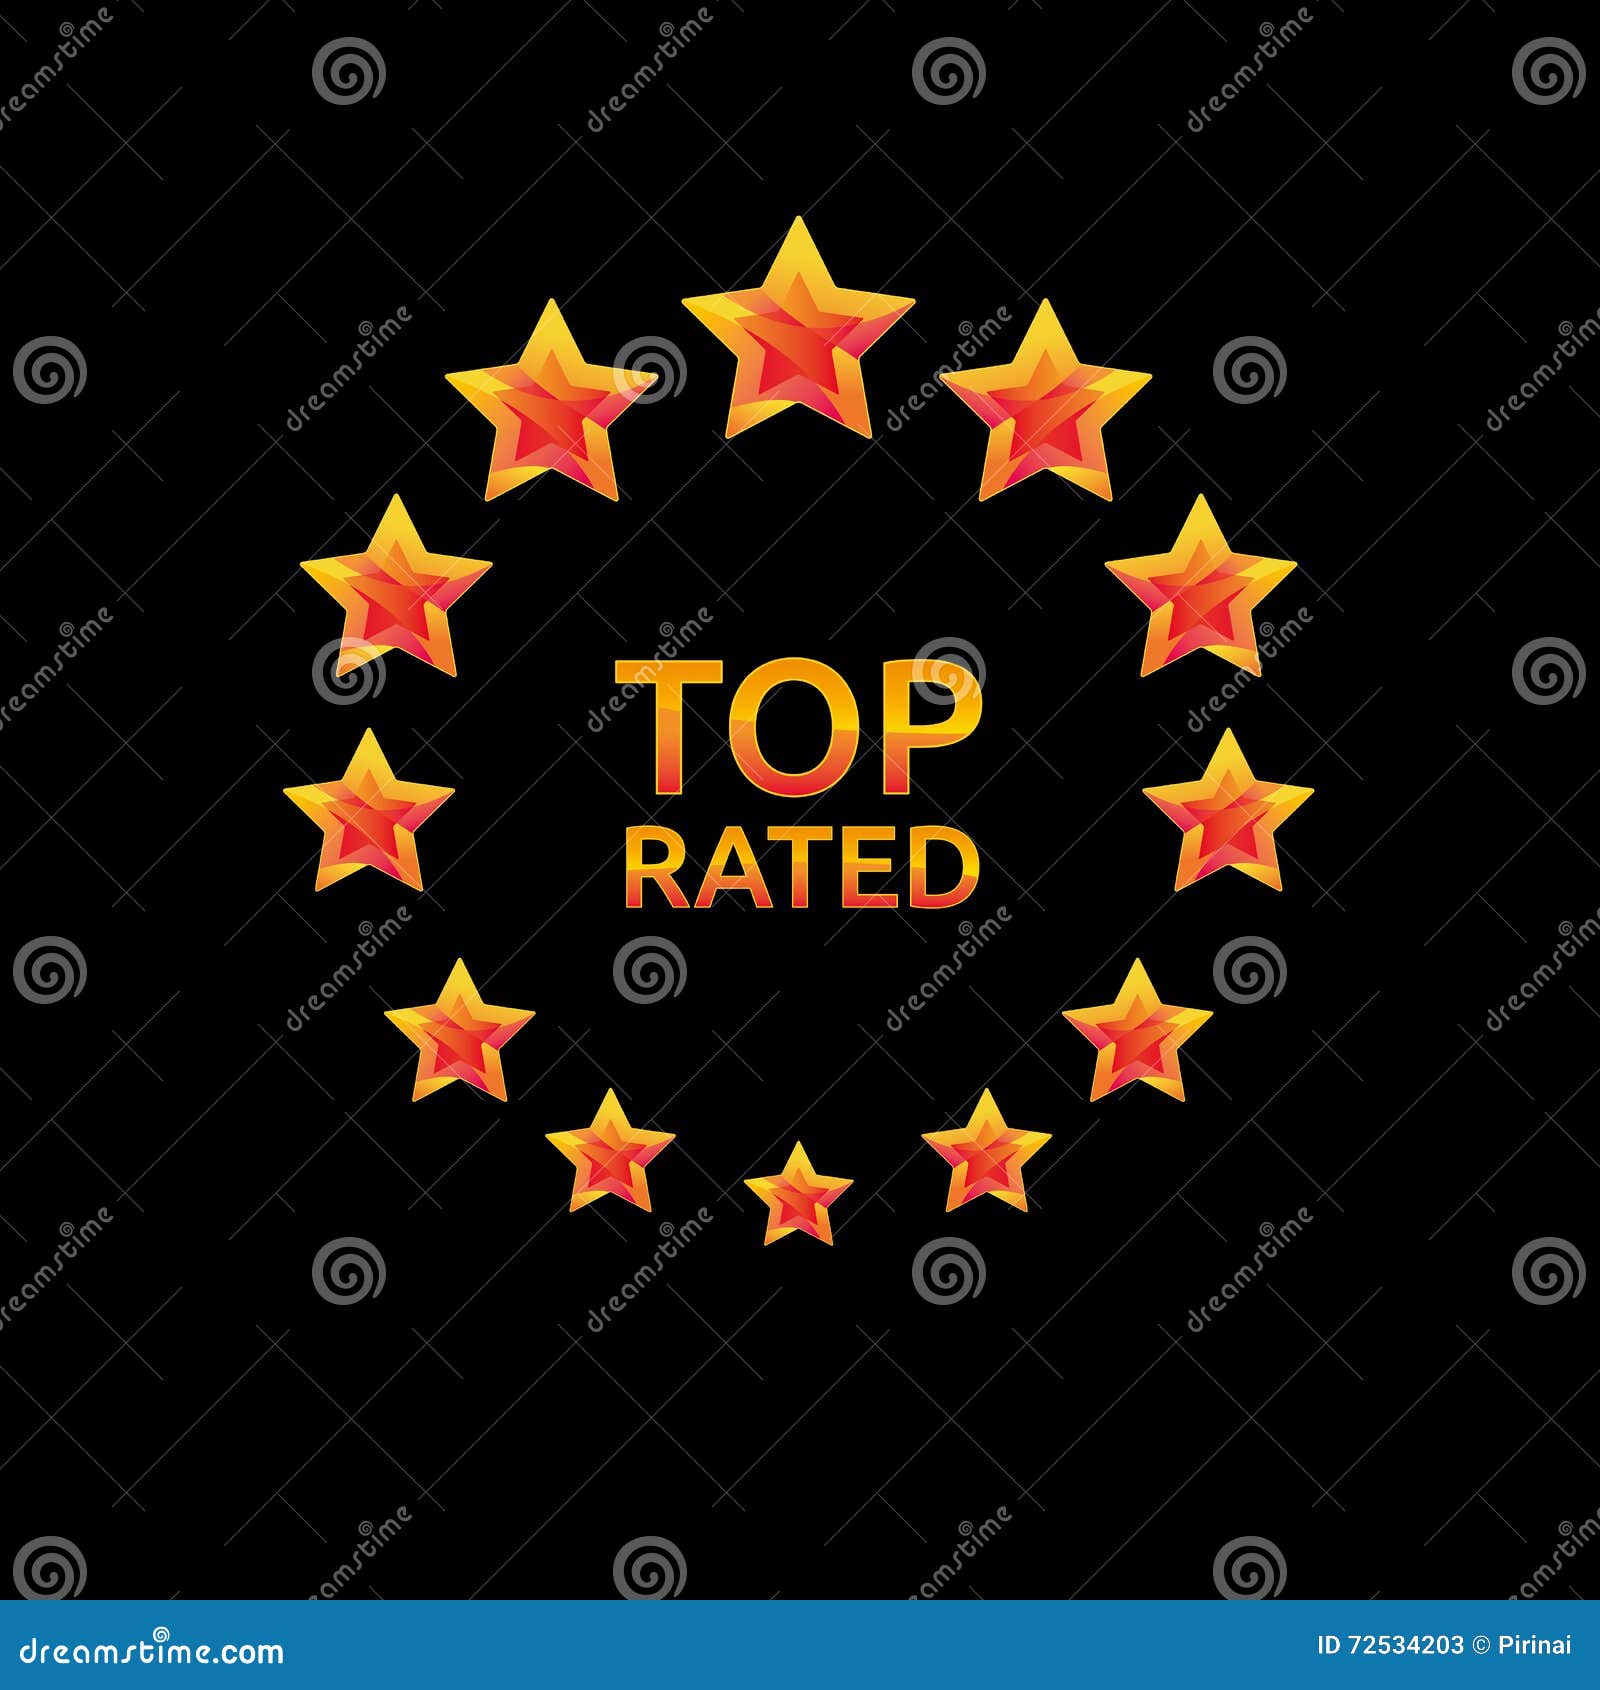 Star top rated circle stock vector. Illustration of design - 72534203